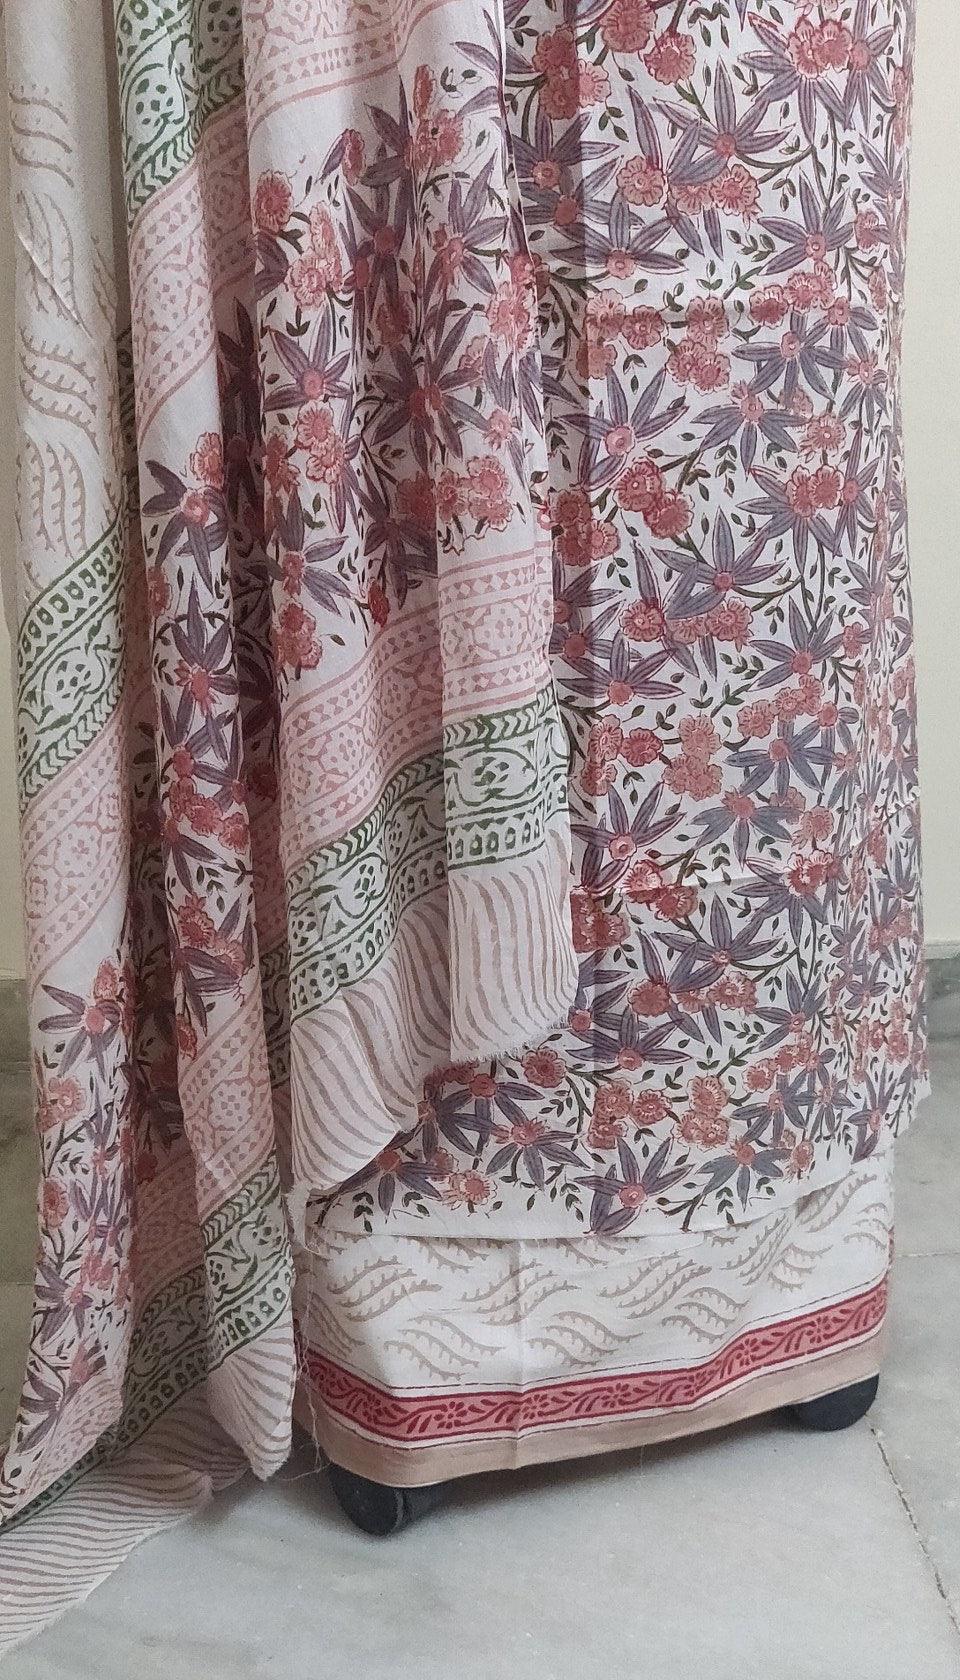 OffWhite Block Printed Cotton Suit with Mulmul Dupatta BP67 - Ethnic's By Anvi Creations